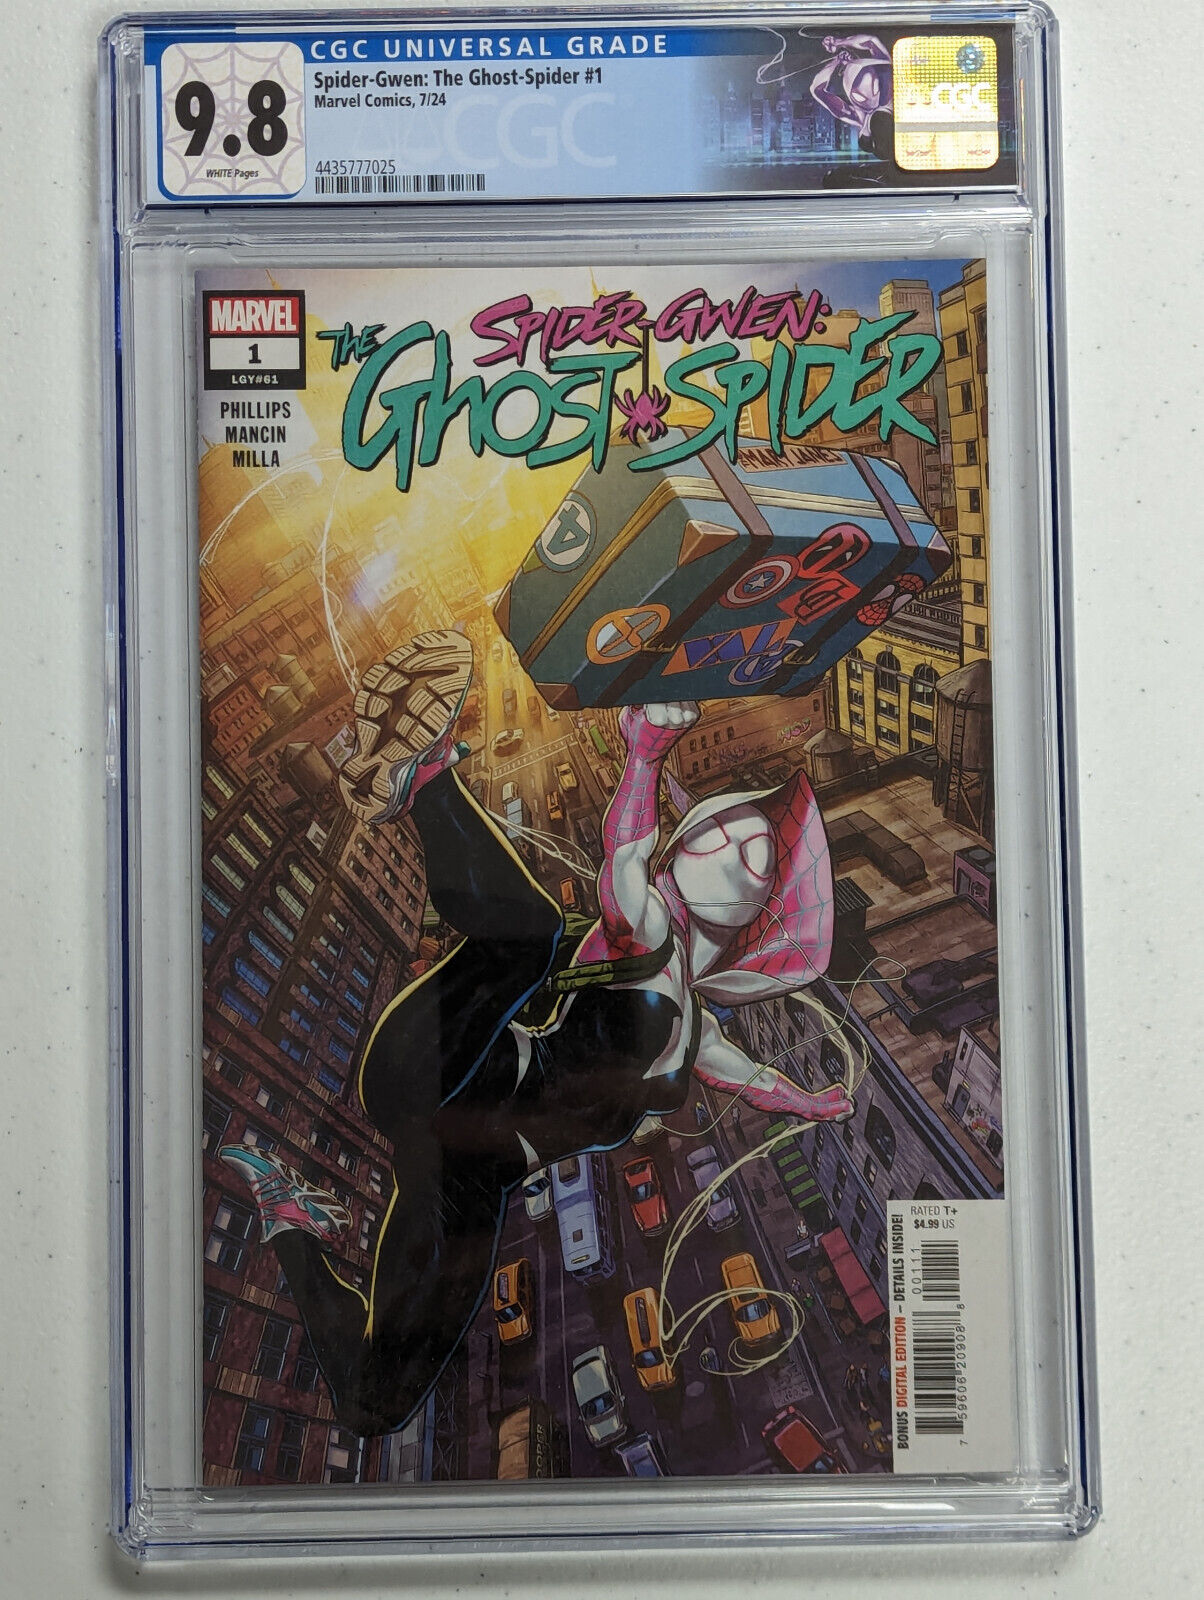 Marvel - Spider-Gwen: The Ghost Spider #1 - CGC 9.8 - 4 covers - IN HAND